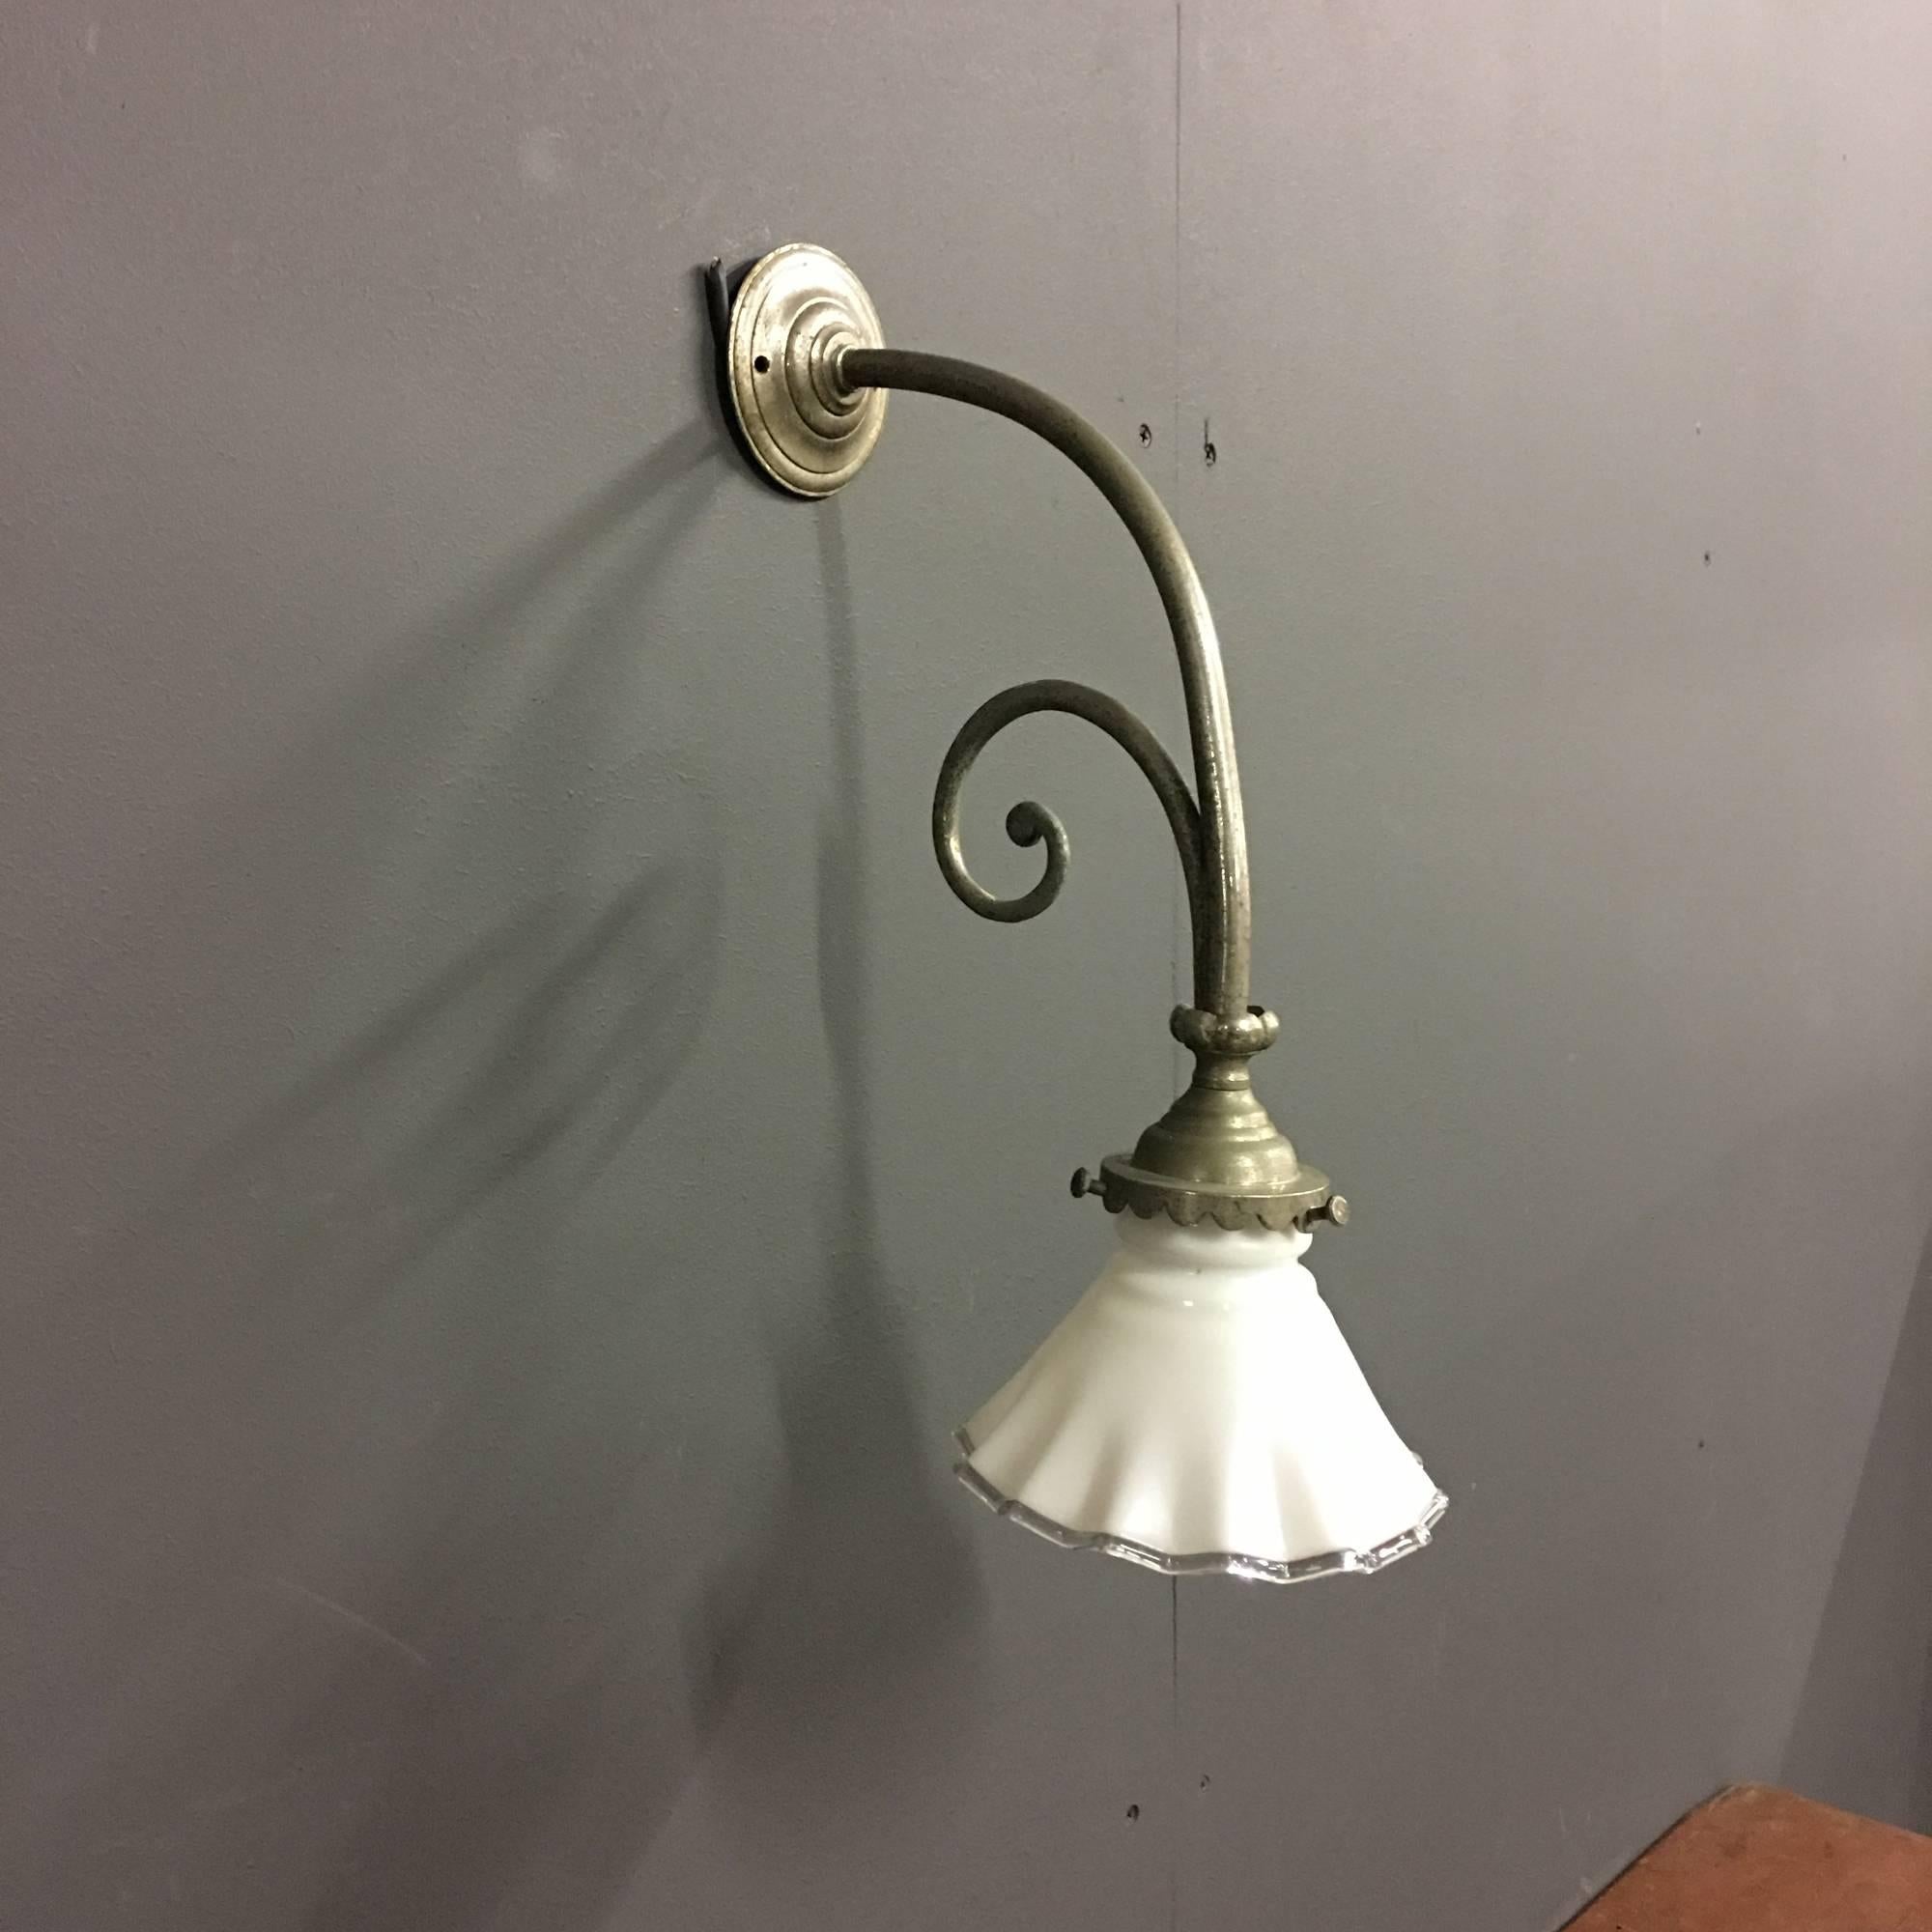 Small wall light fixture with white opaline glass lamp shade. Has the original Bajonet socket but has been rewired and is ready to use. With nice wear and patina on the chrome, This light remains in good condition.